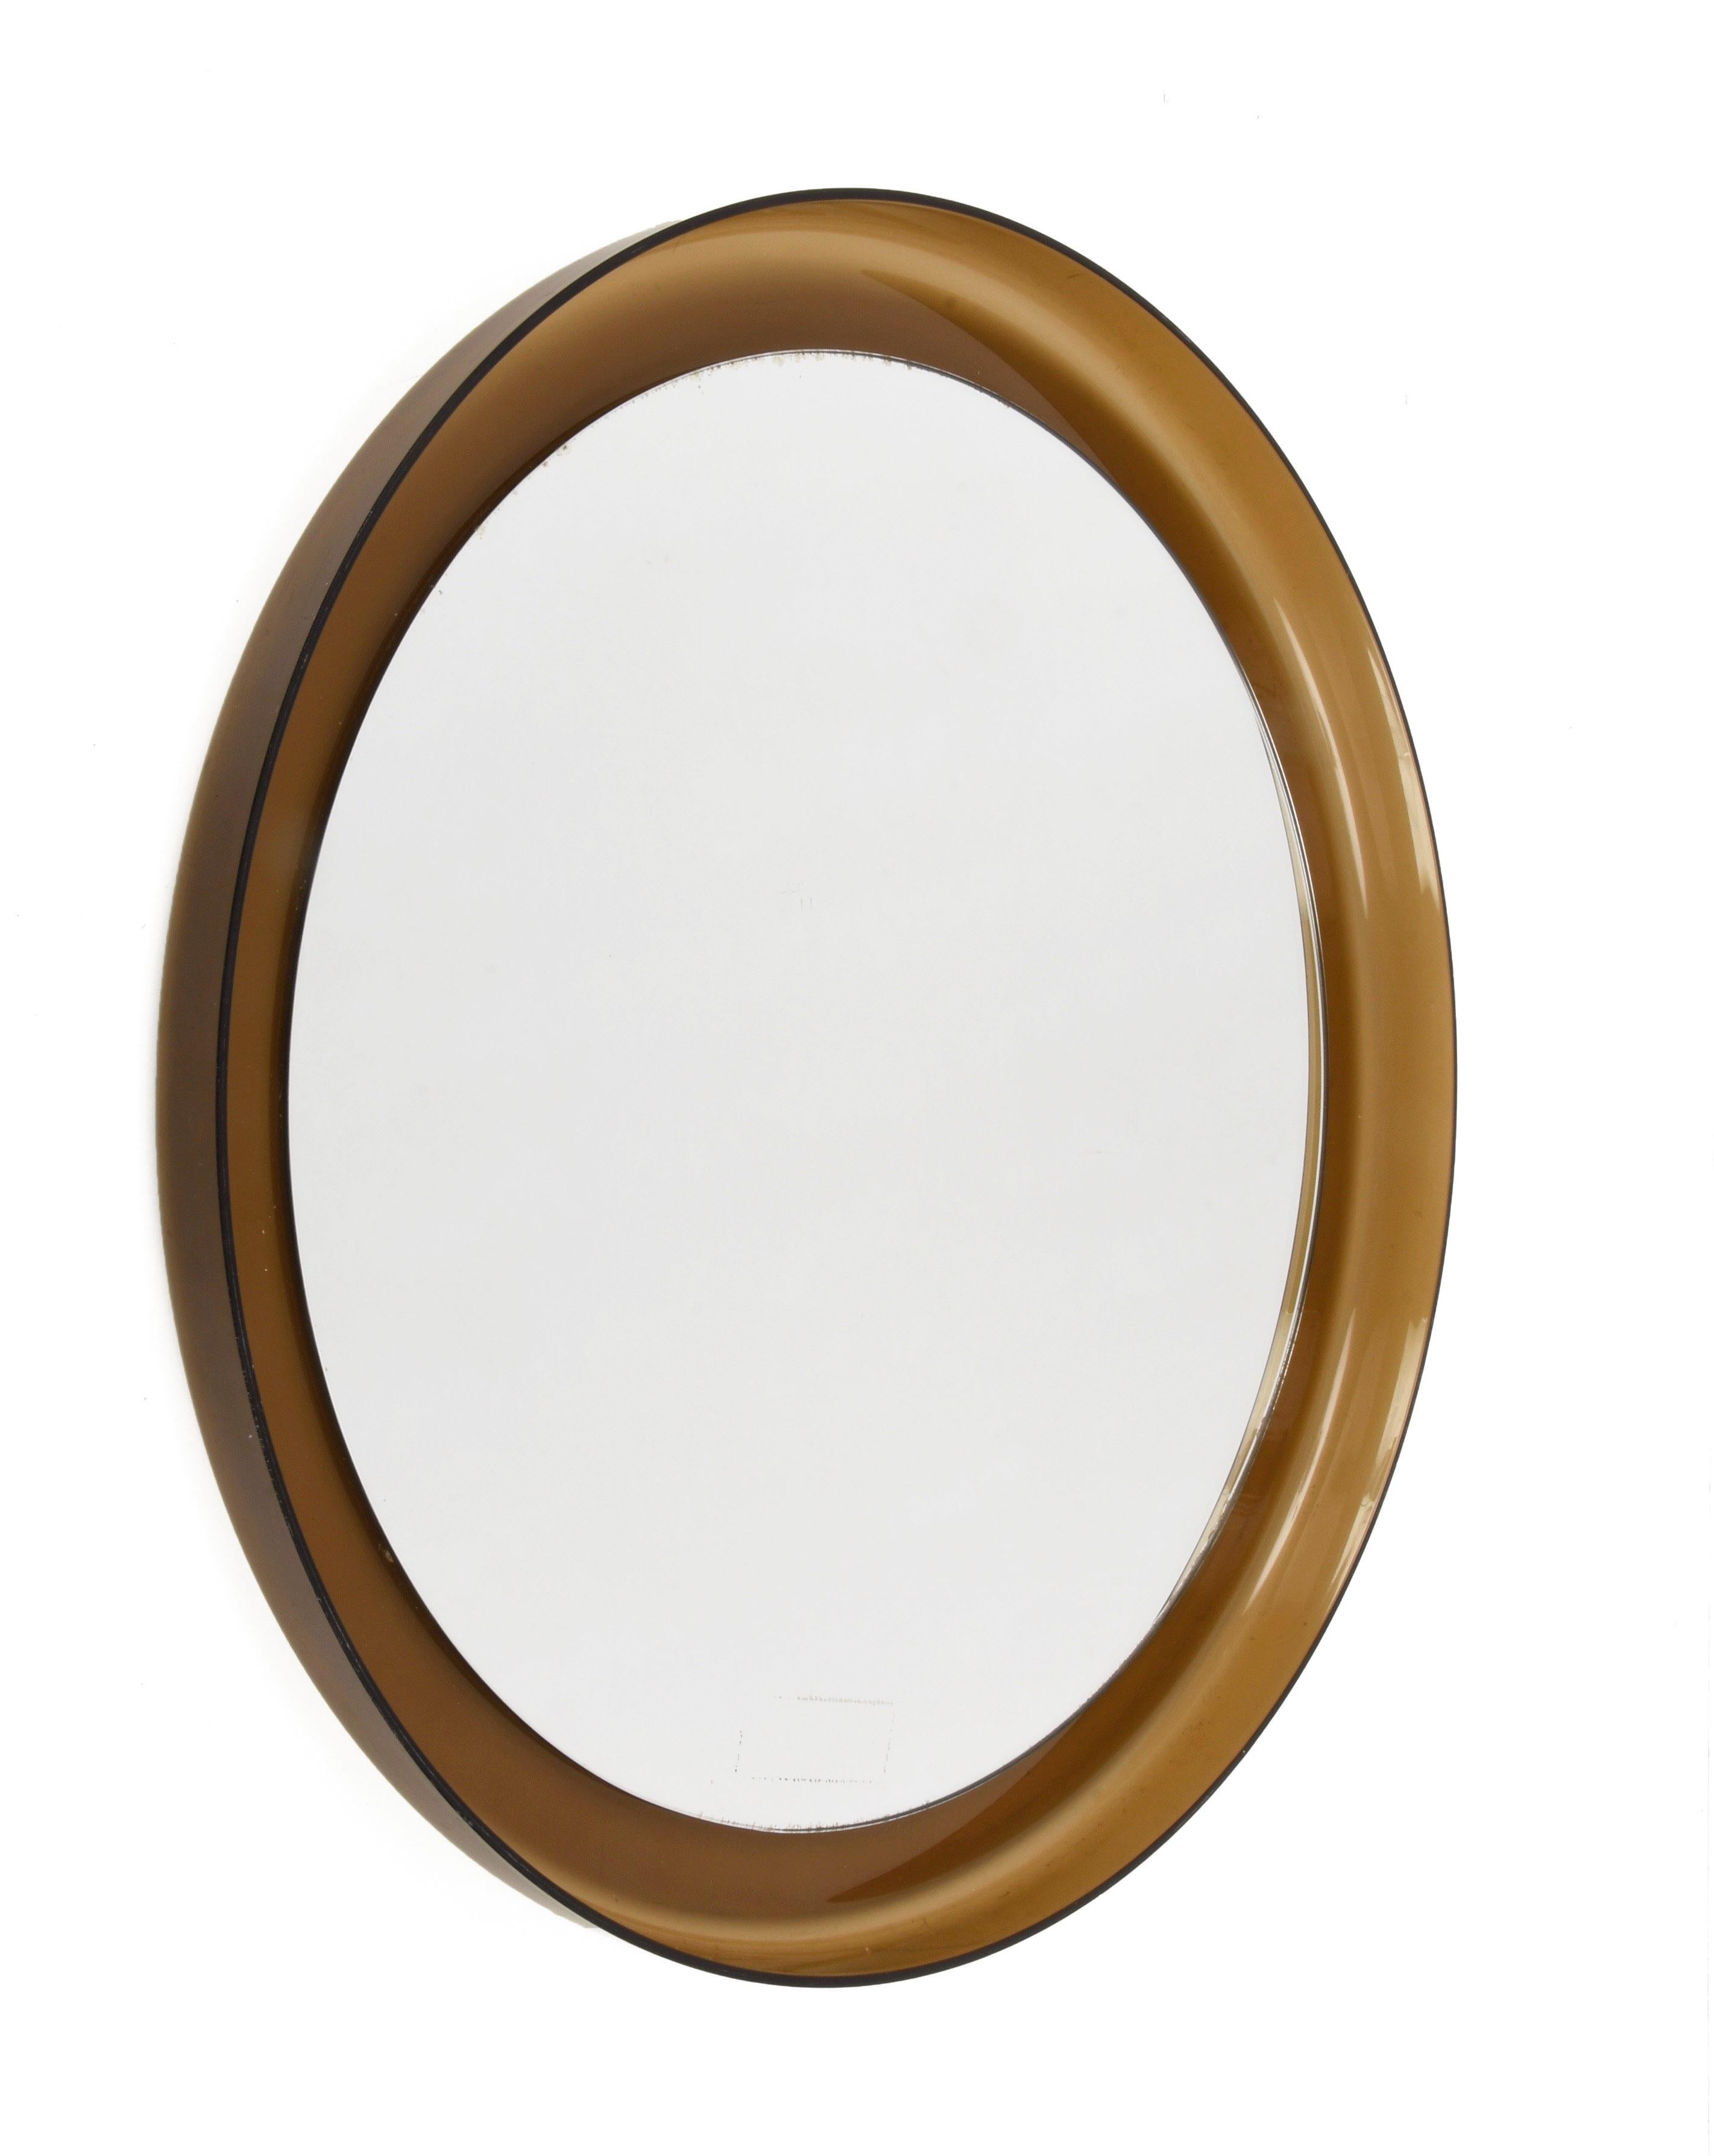 Midcentury Guzzini Italian Round Lucite Smoked Brown Wall Mirror, 1960s For Sale 6